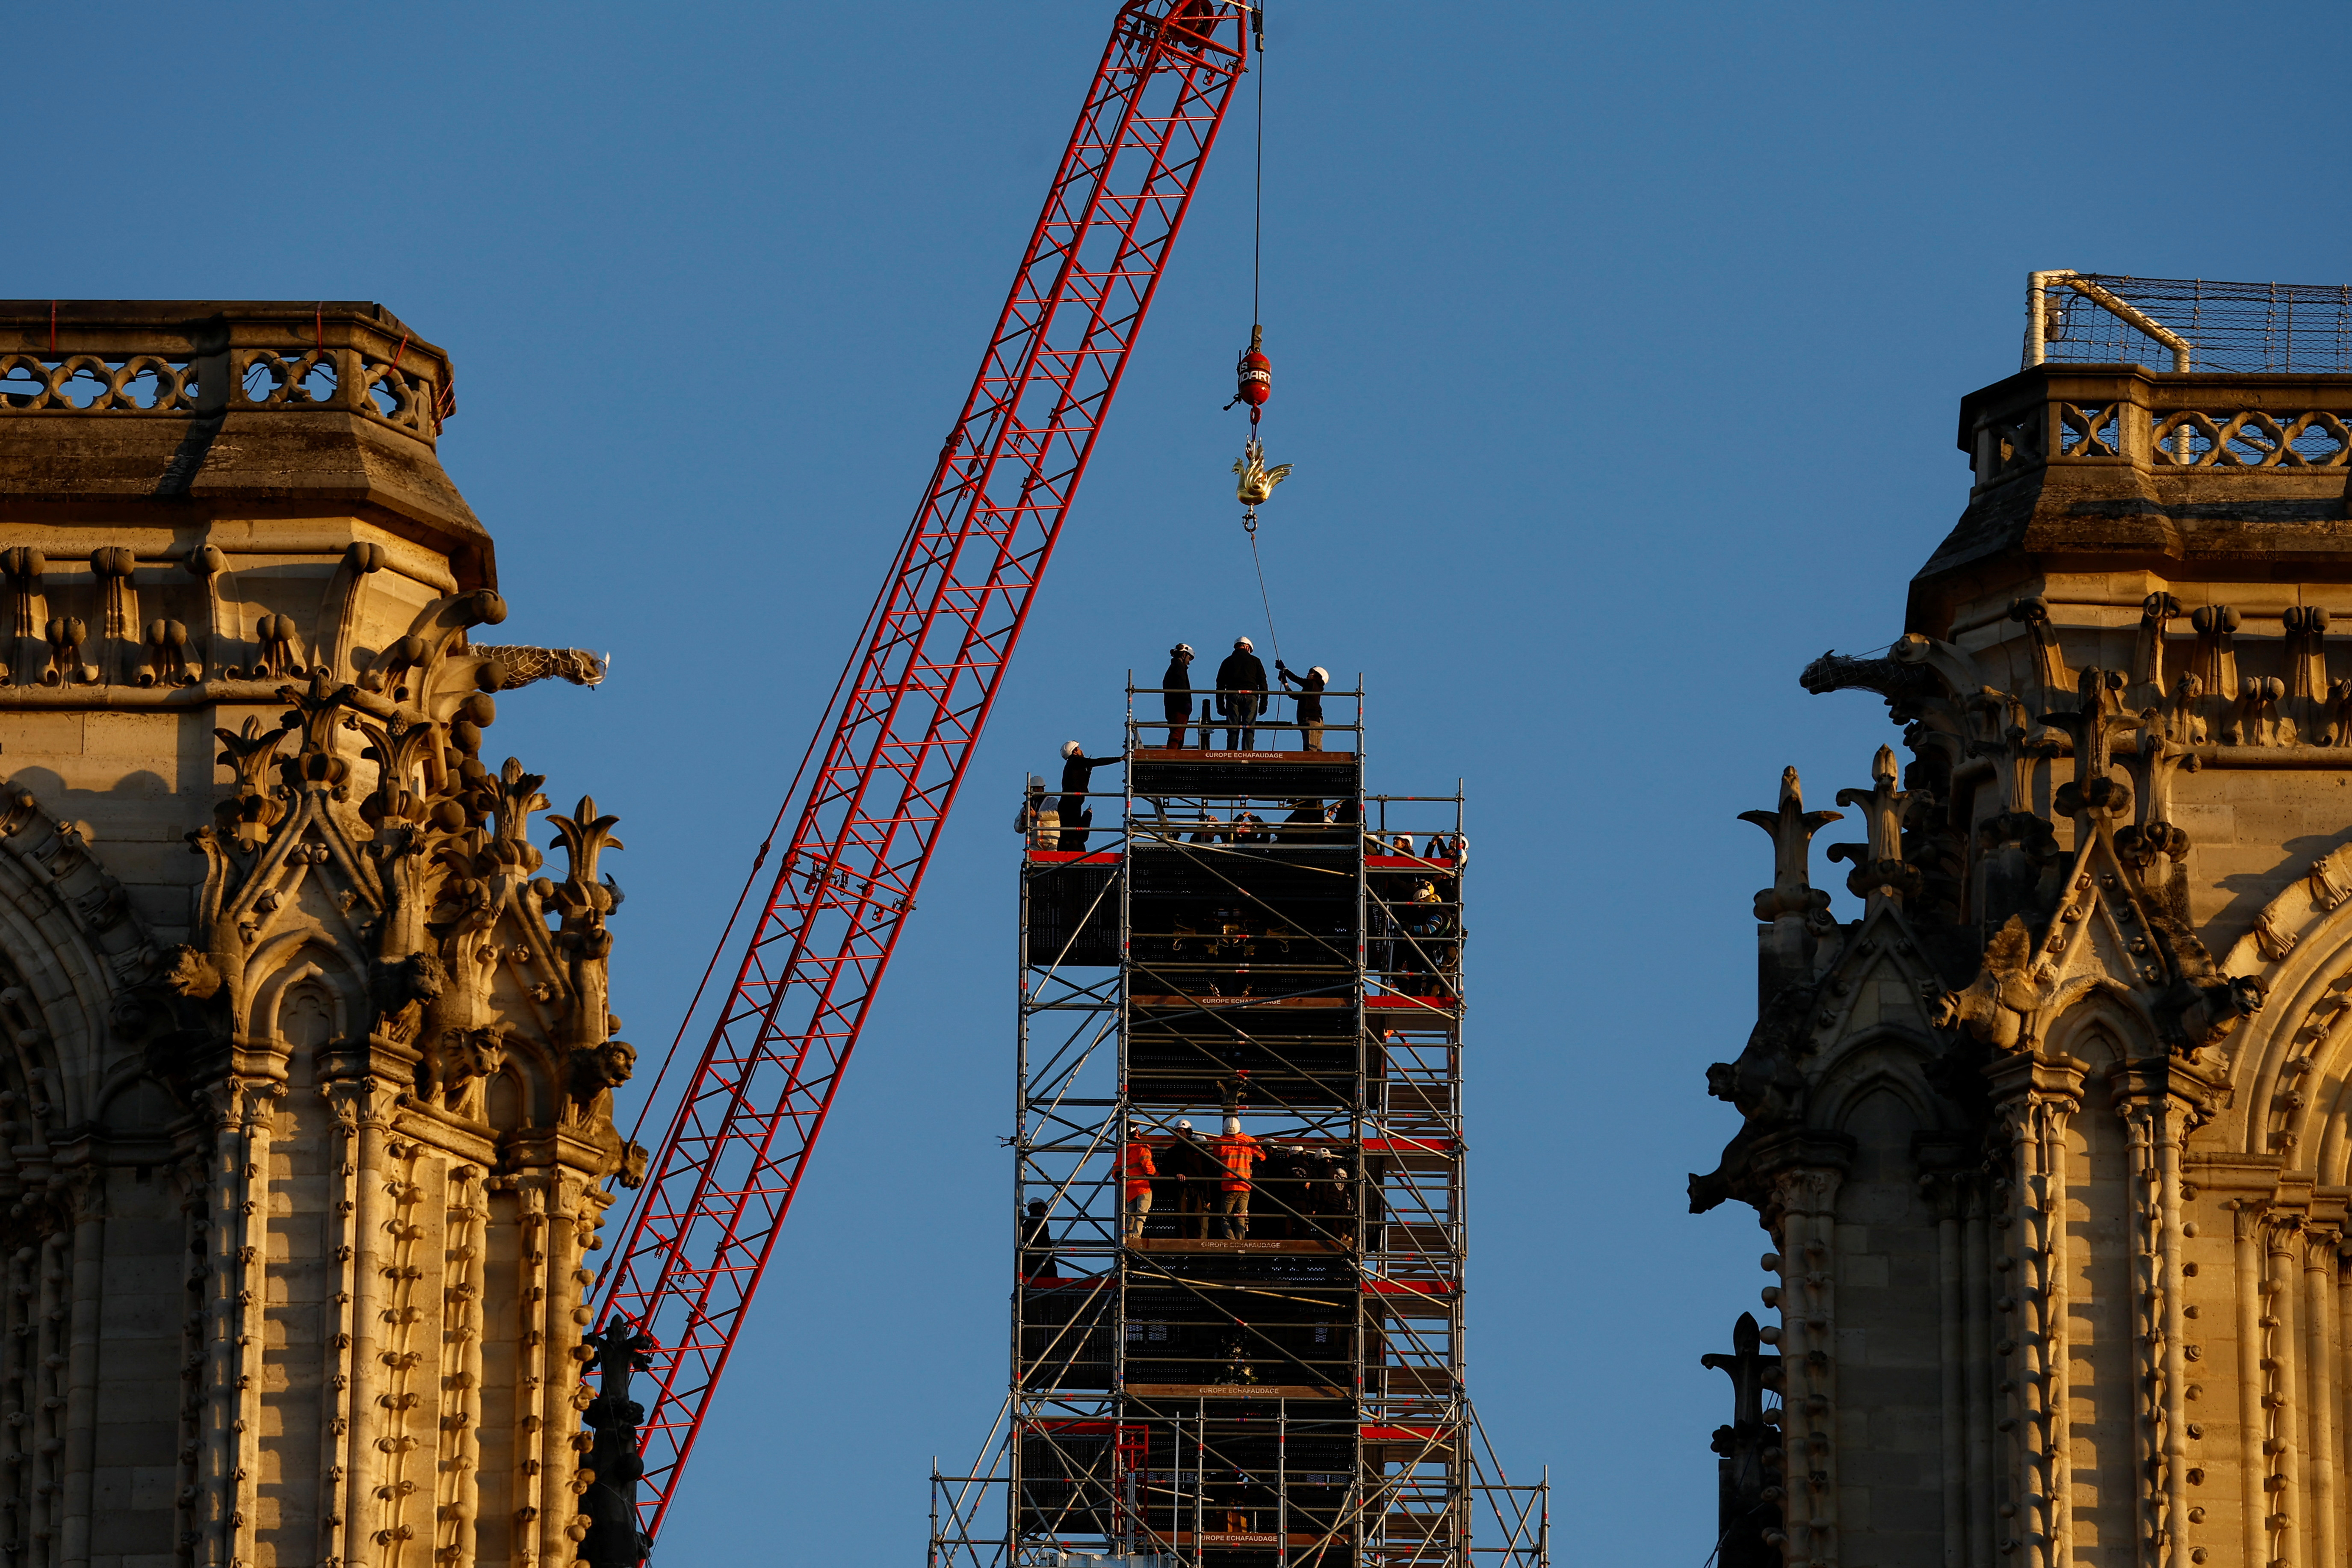 Paris's Notre-Dame spire is crowned by new golden rooster to symbolize  rebirth